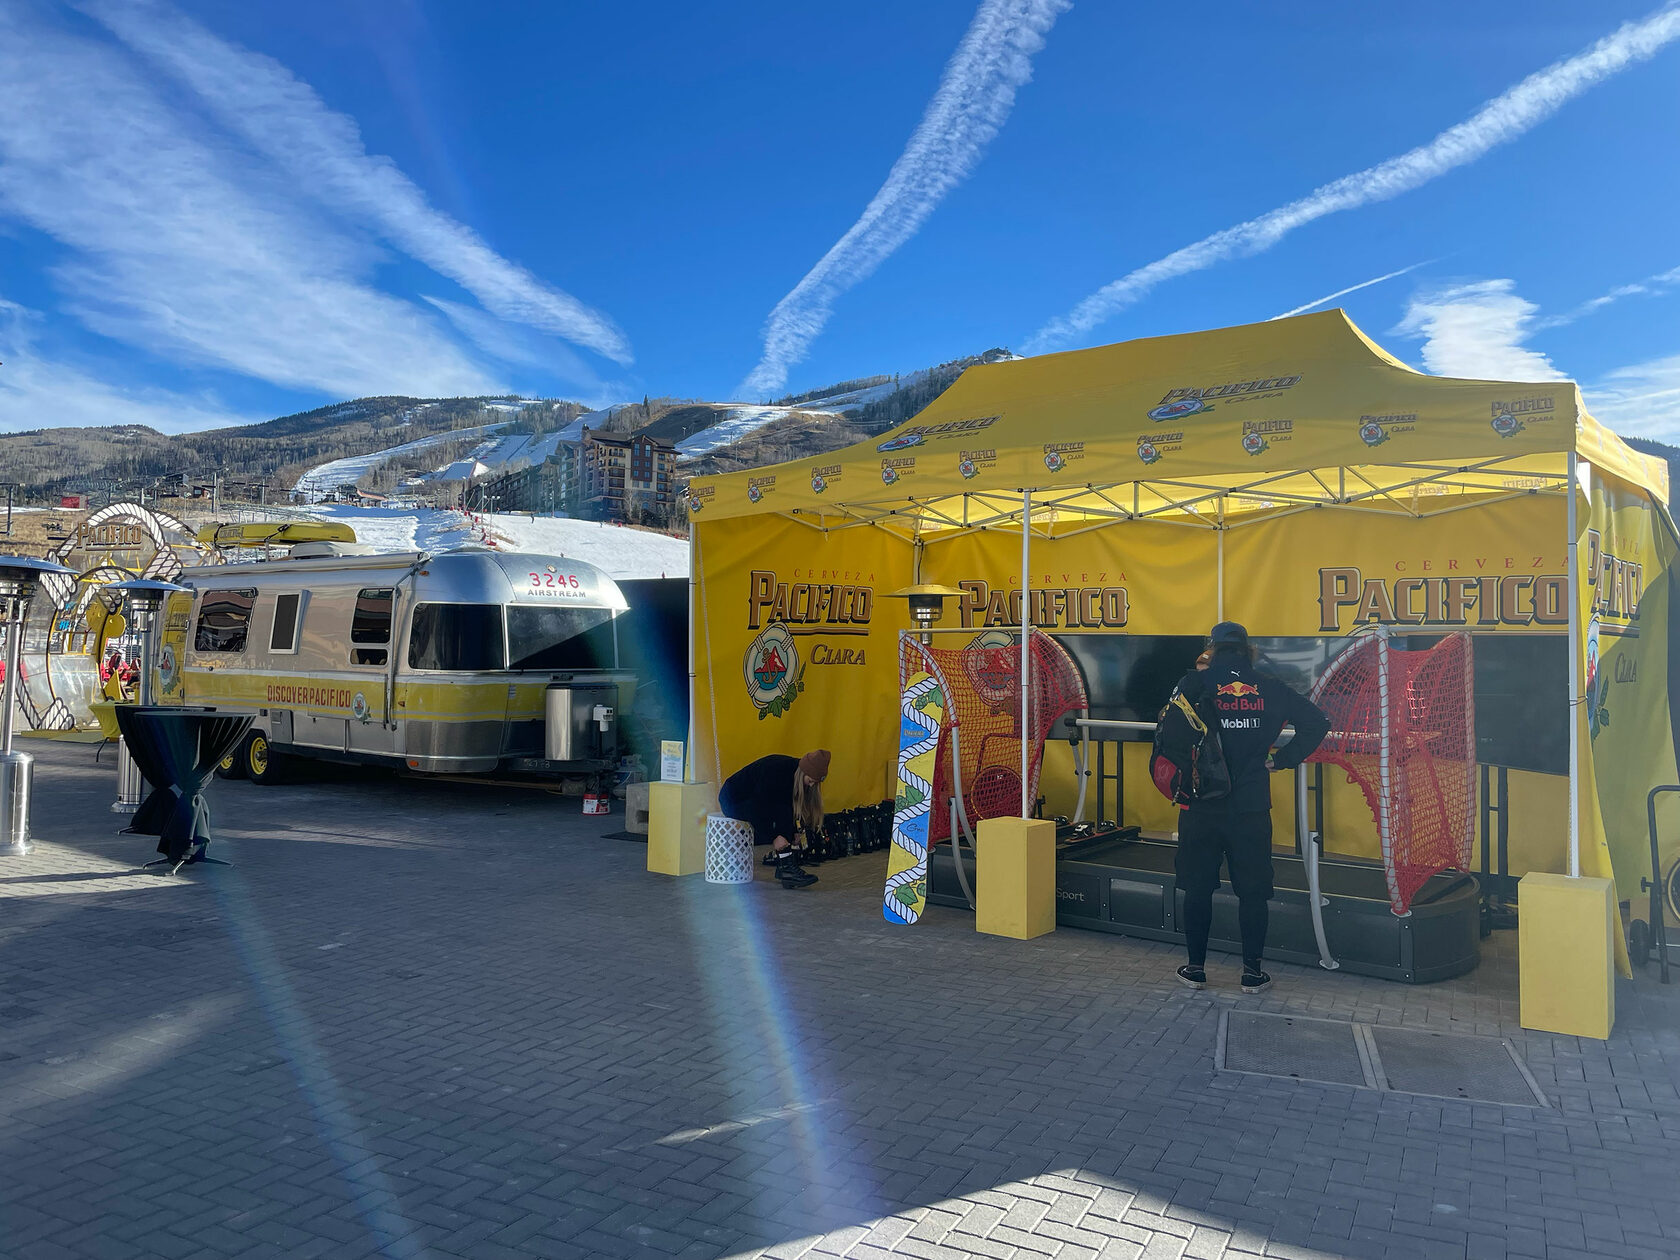 SkyTechSport partners with Pacifico beer for a big skiing event in Copper Mountain